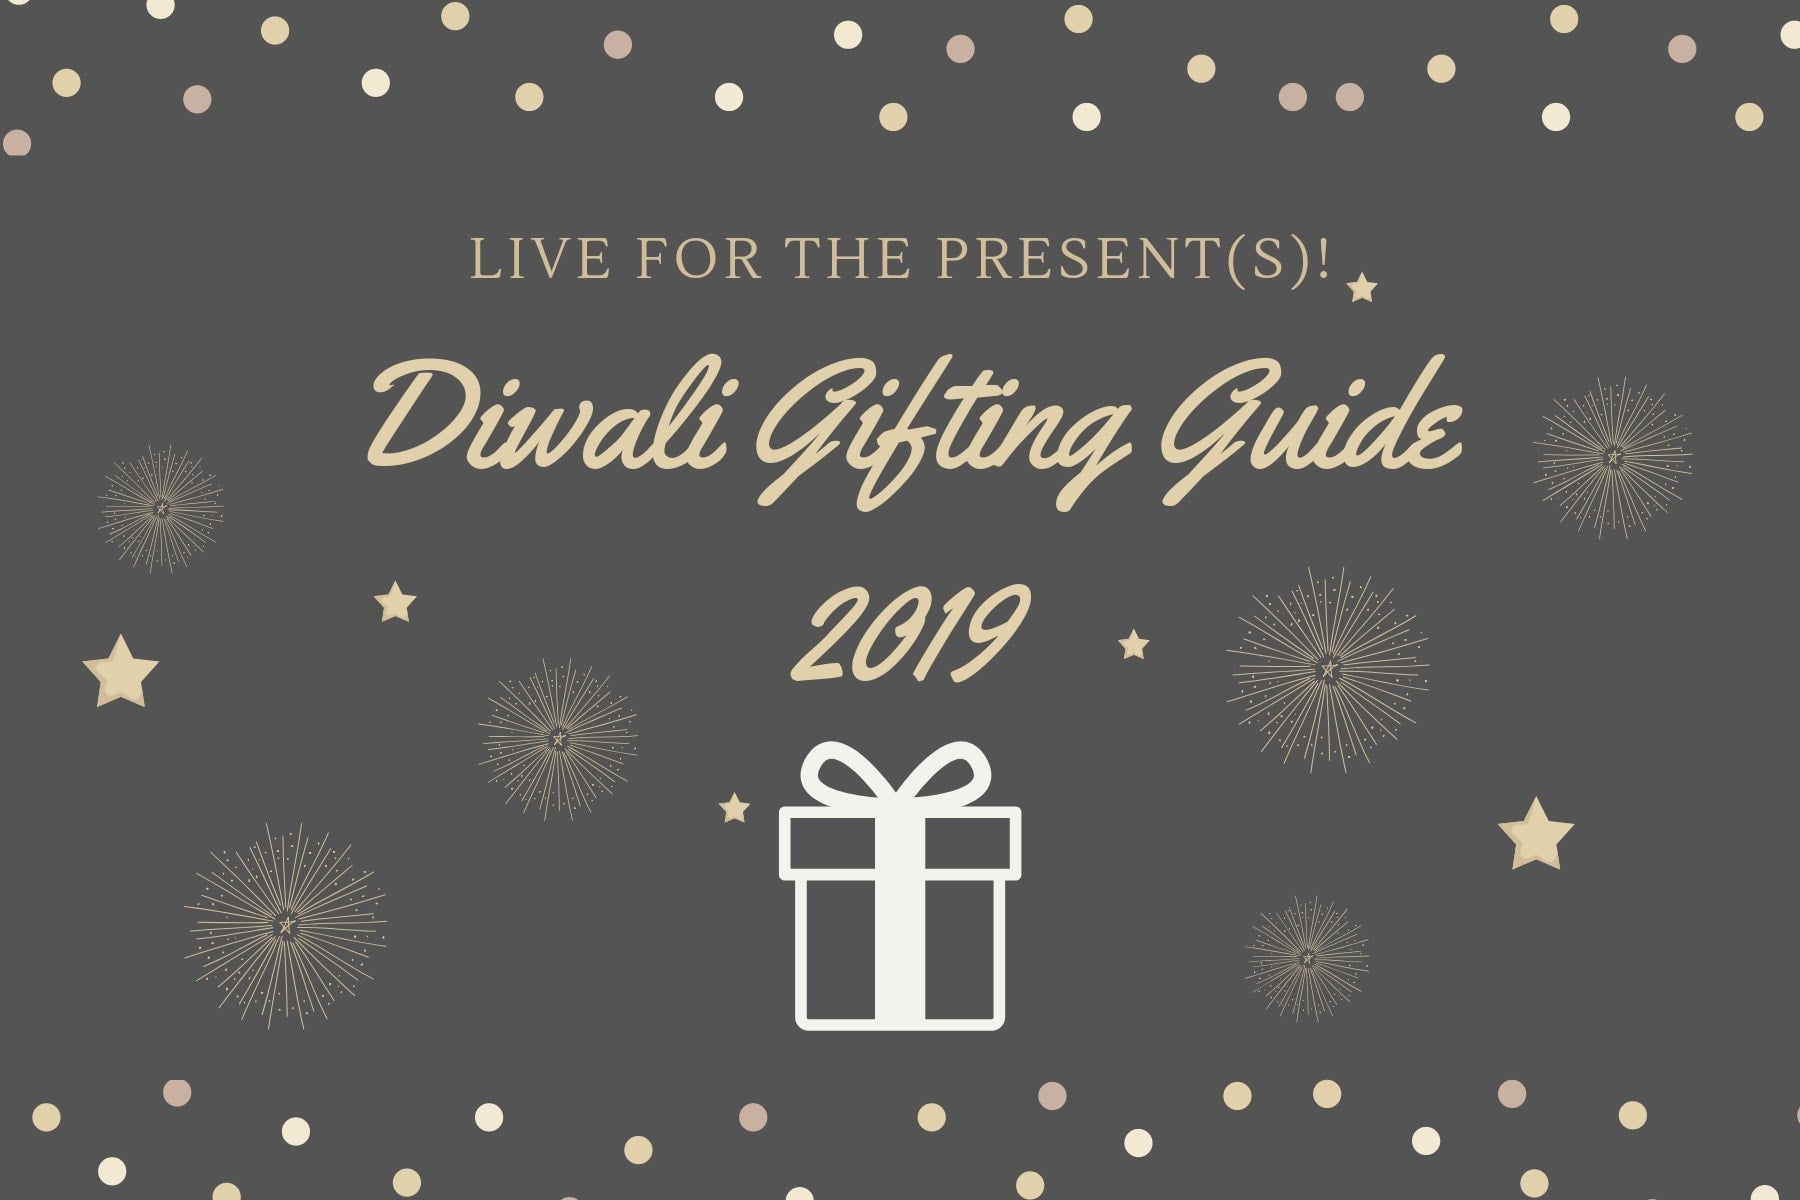 The Diwali Gifting Guide 2019